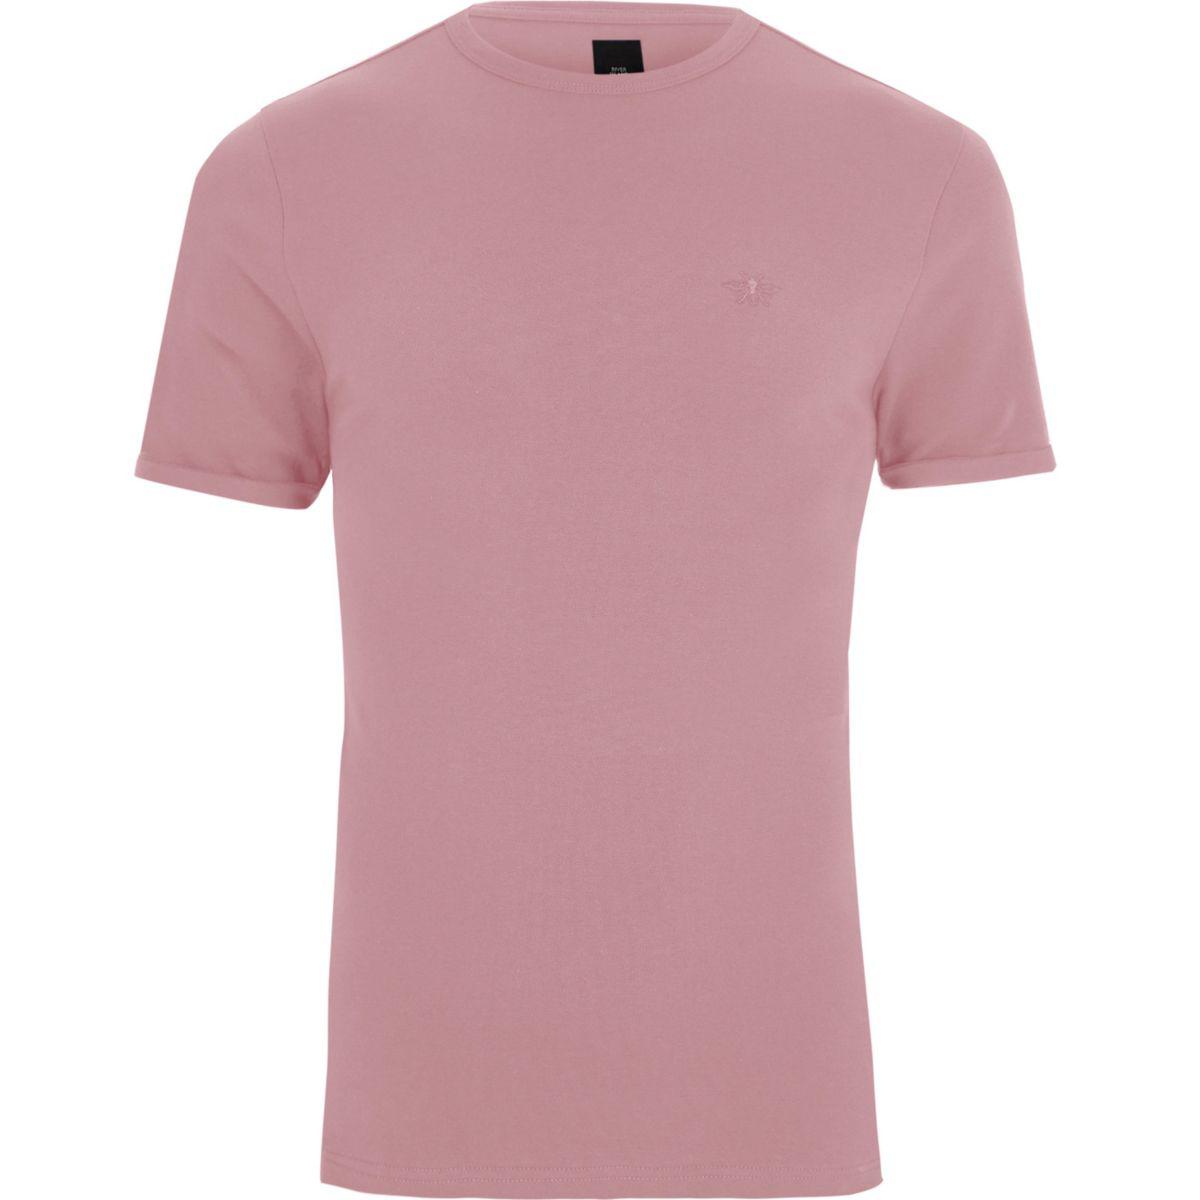 River island Pink Pique Muscle Fit T-shirt Pink Pique Muscle Fit T ...